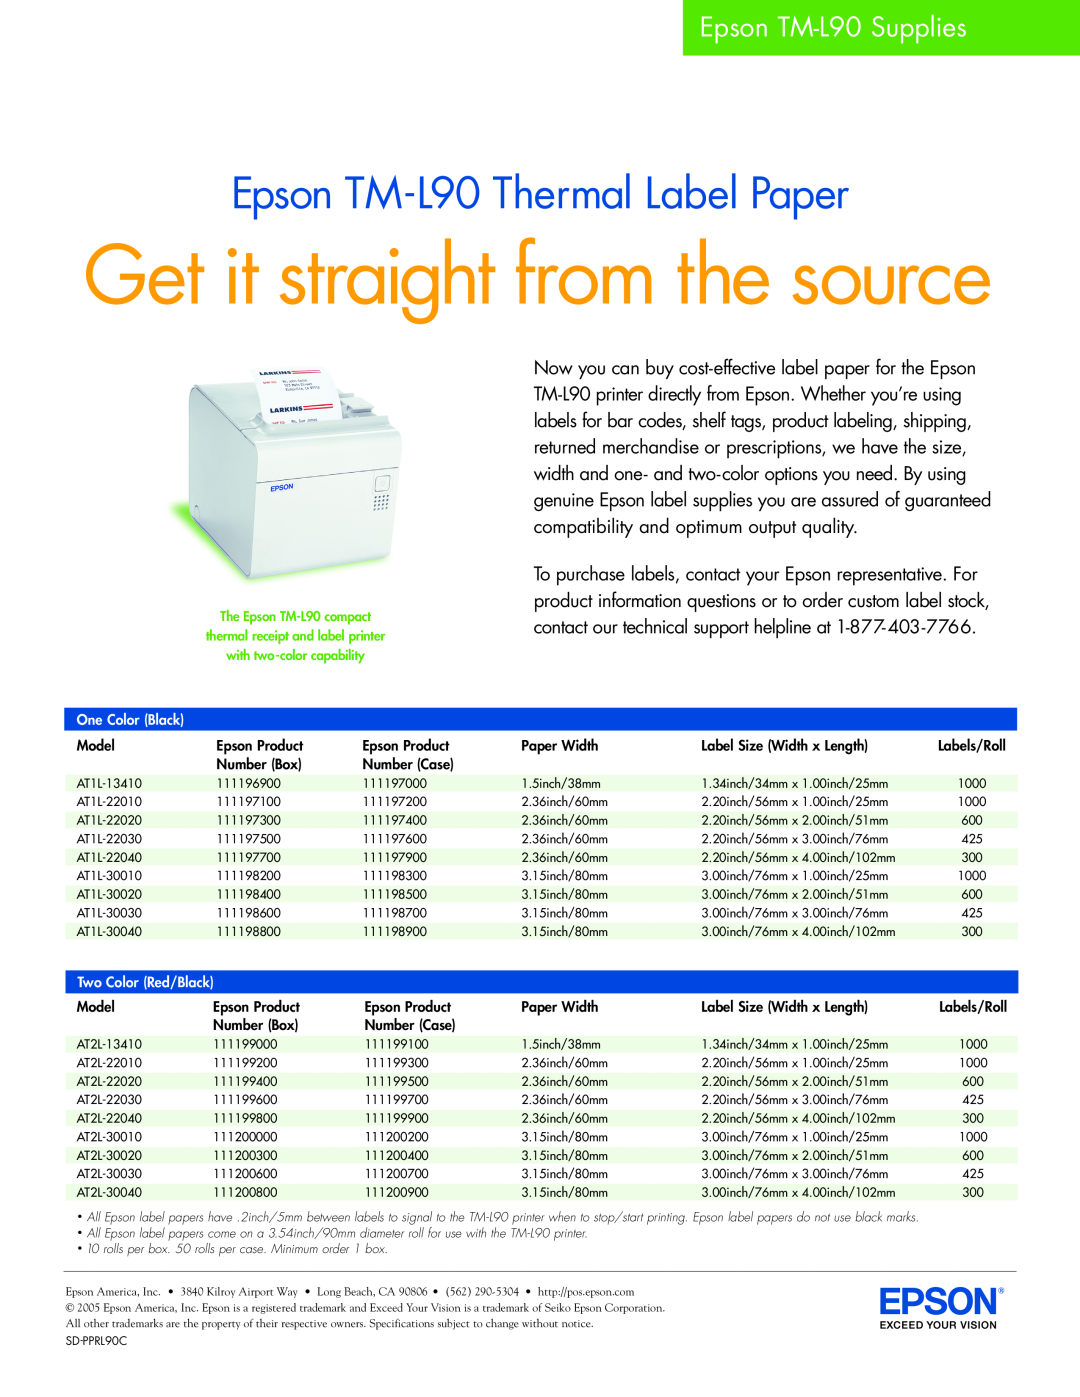 Epson AT1L-30030 specifications Get it straight from the source, Epson TM-L90 Thermal Label Paper, Epson TM-L90 Supplies 